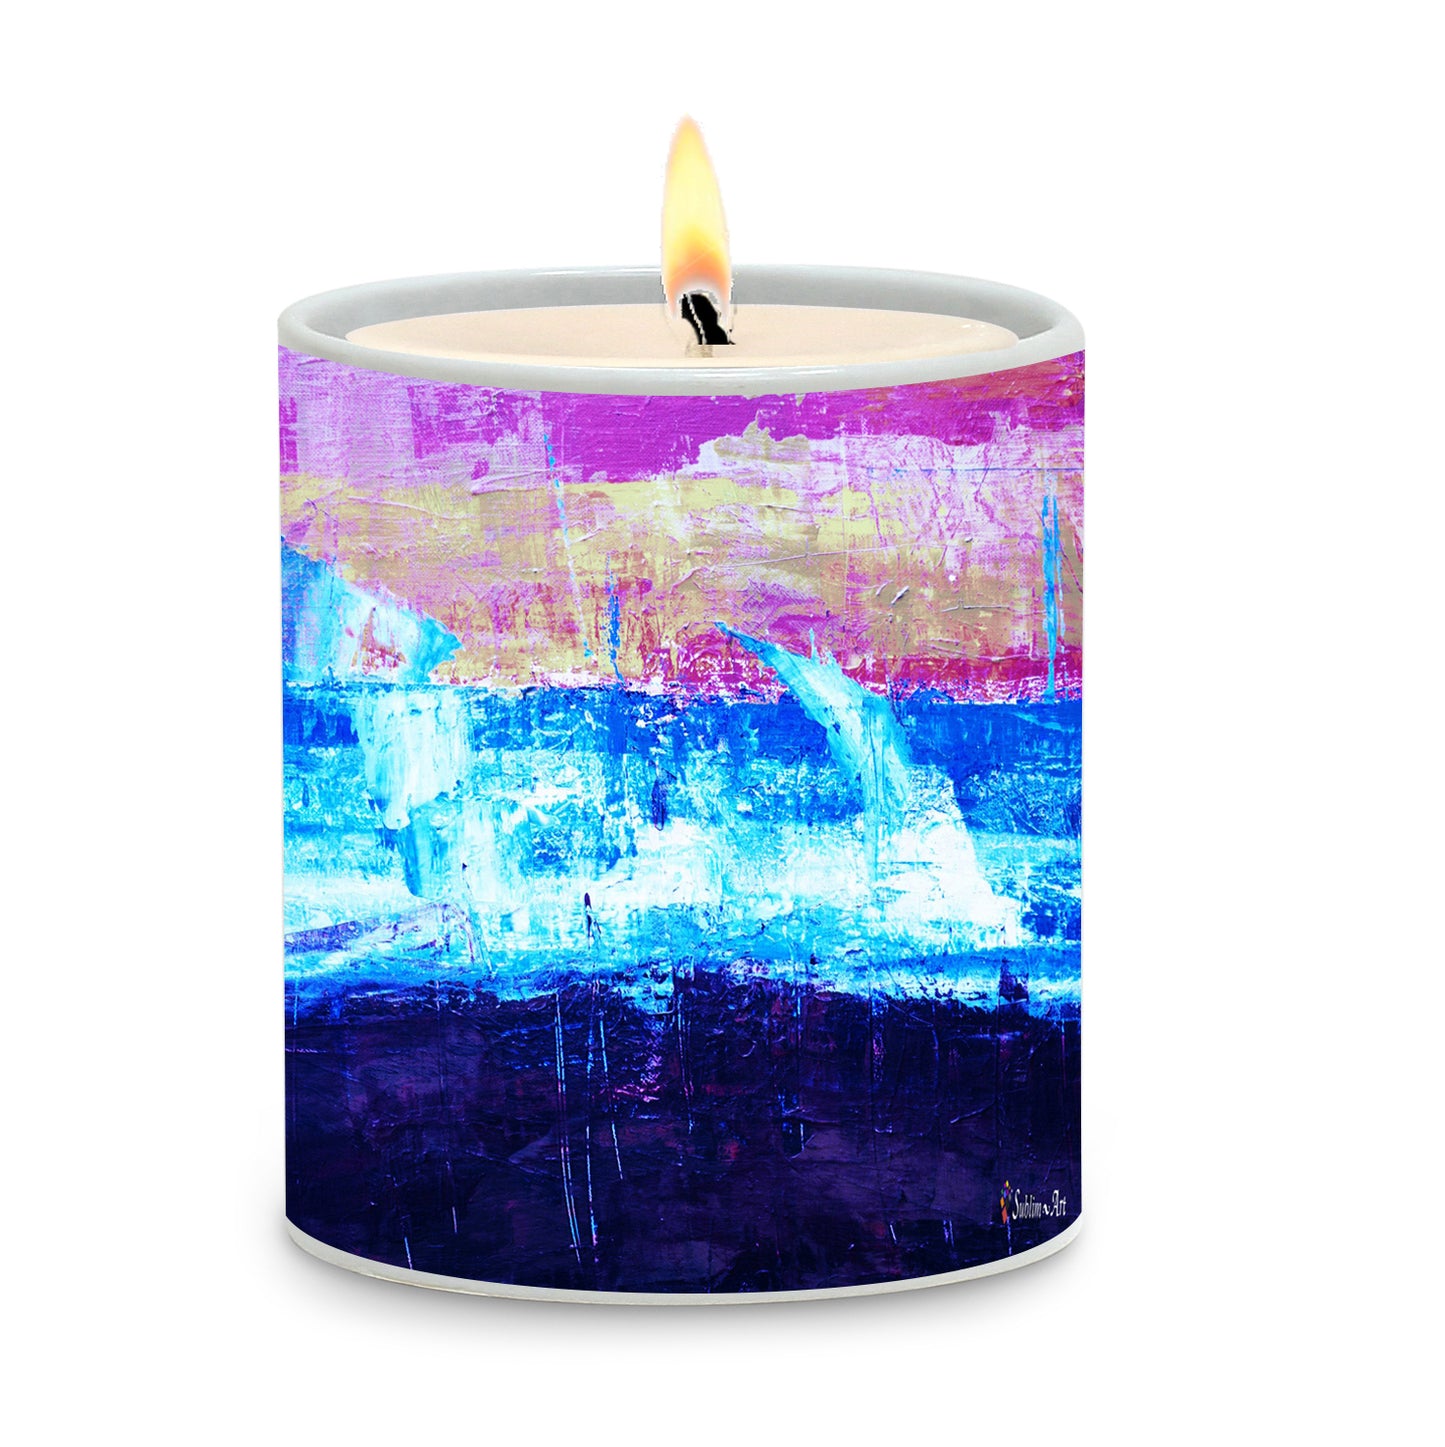 SUBLIMART: Abstract Design - Porcelain Soy Wax Candle (Design #ABS1)